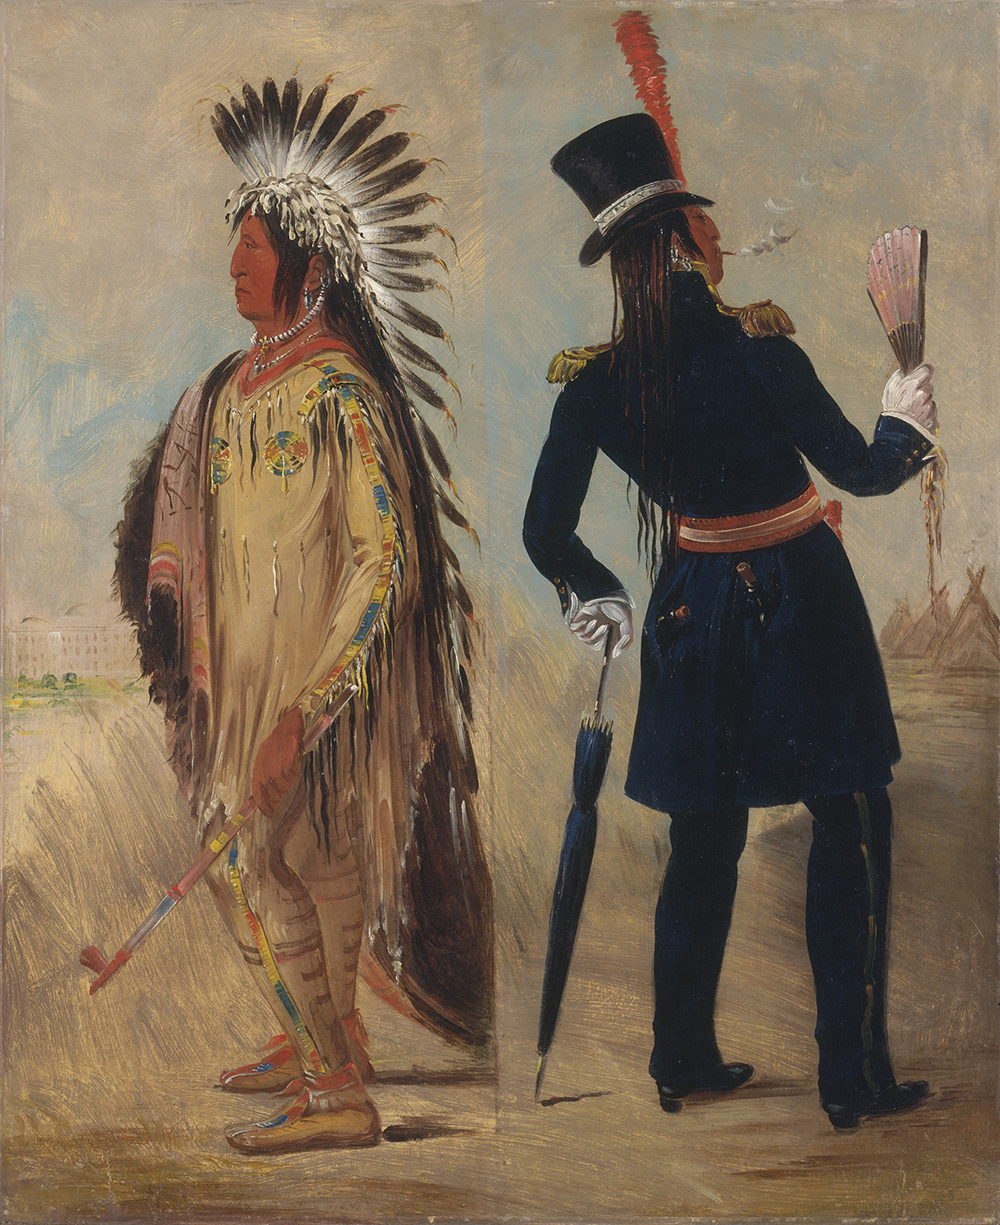 Wi-jún-jon Going to and Returning from Washington, by George Catlin, c. 1837.